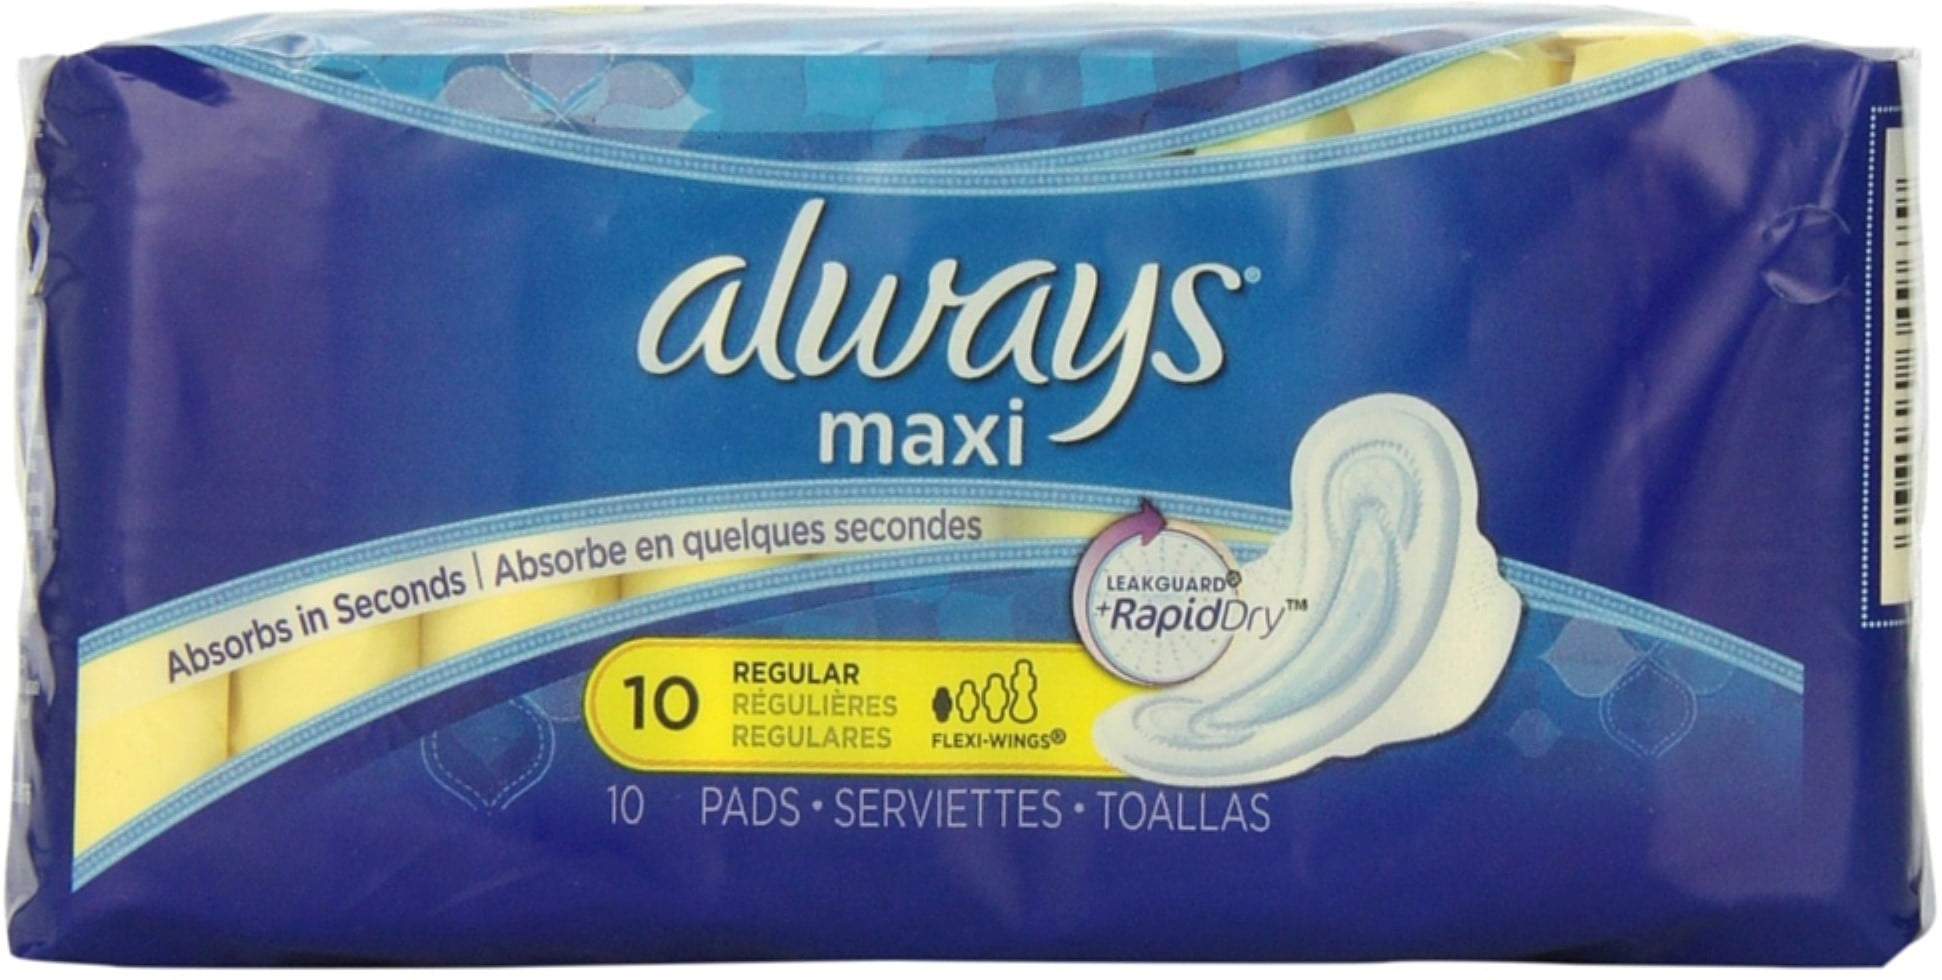 Always Radiant Feminine Pads with Wings, Size 2, Heavy Absorbency, Scented,  26 CT